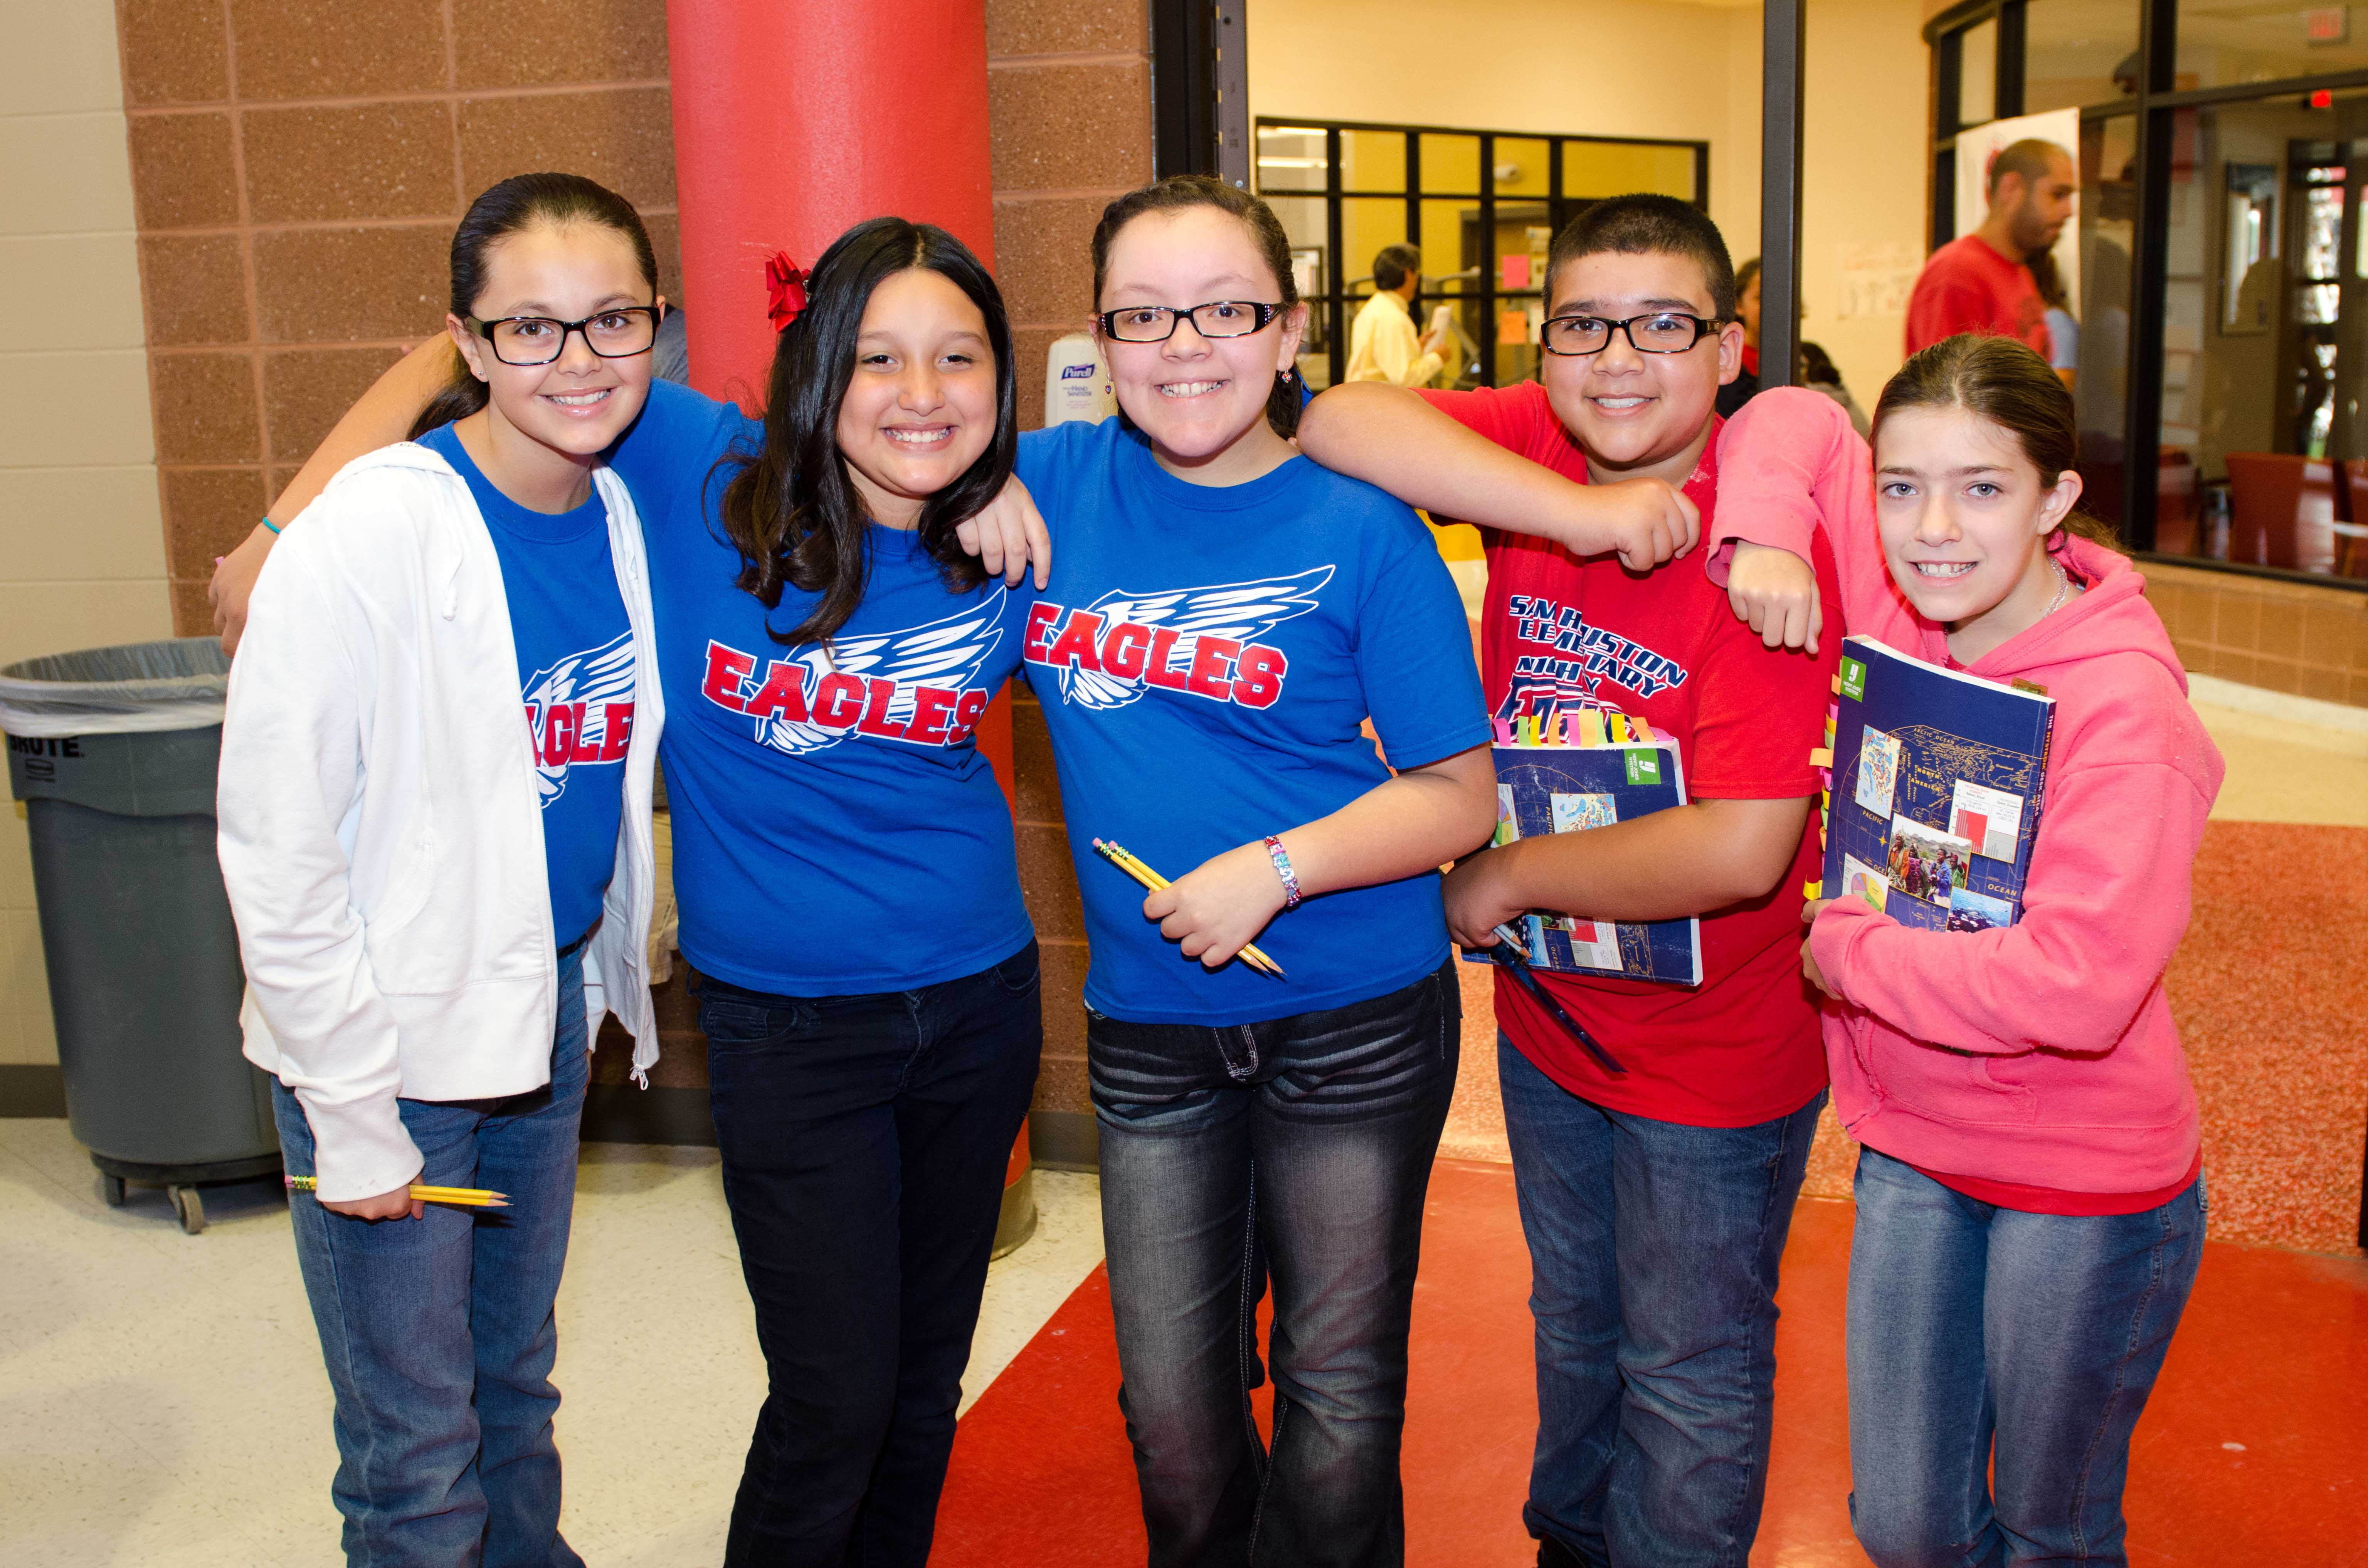 Elementary schools meet challenges at district academic competition